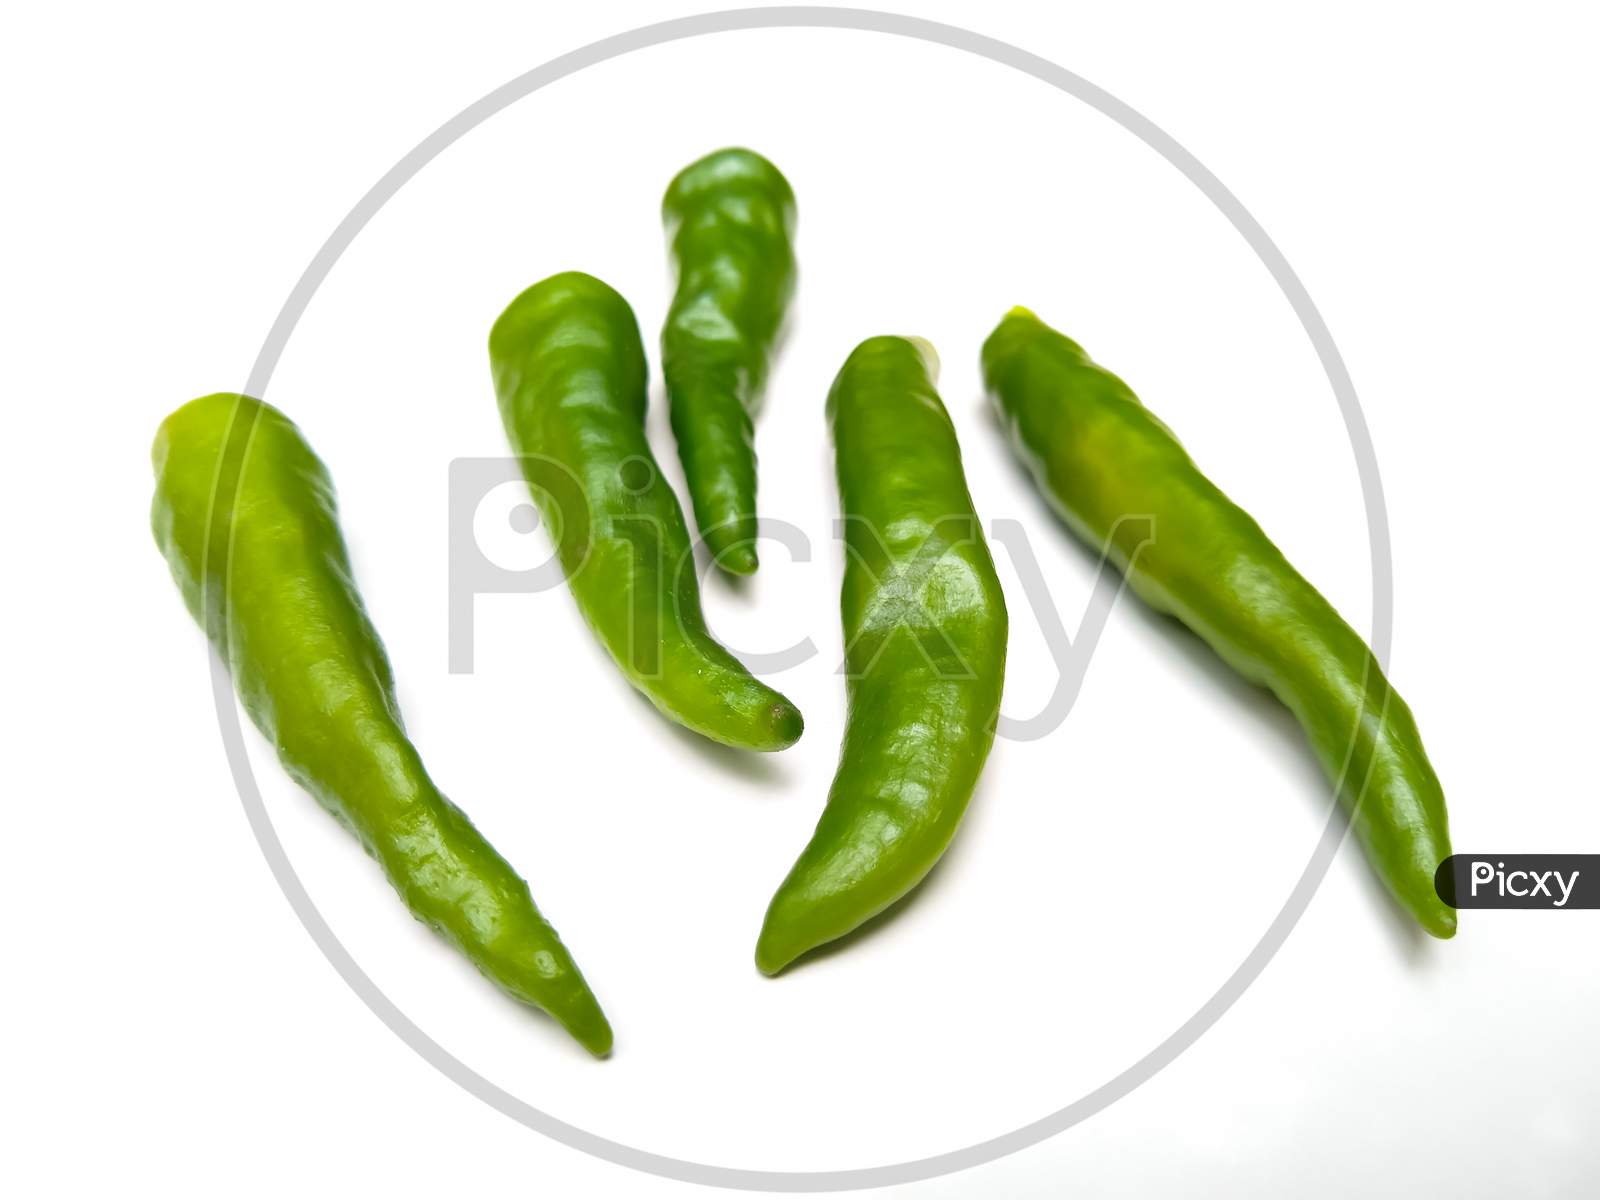 Green chilli peppers on white background